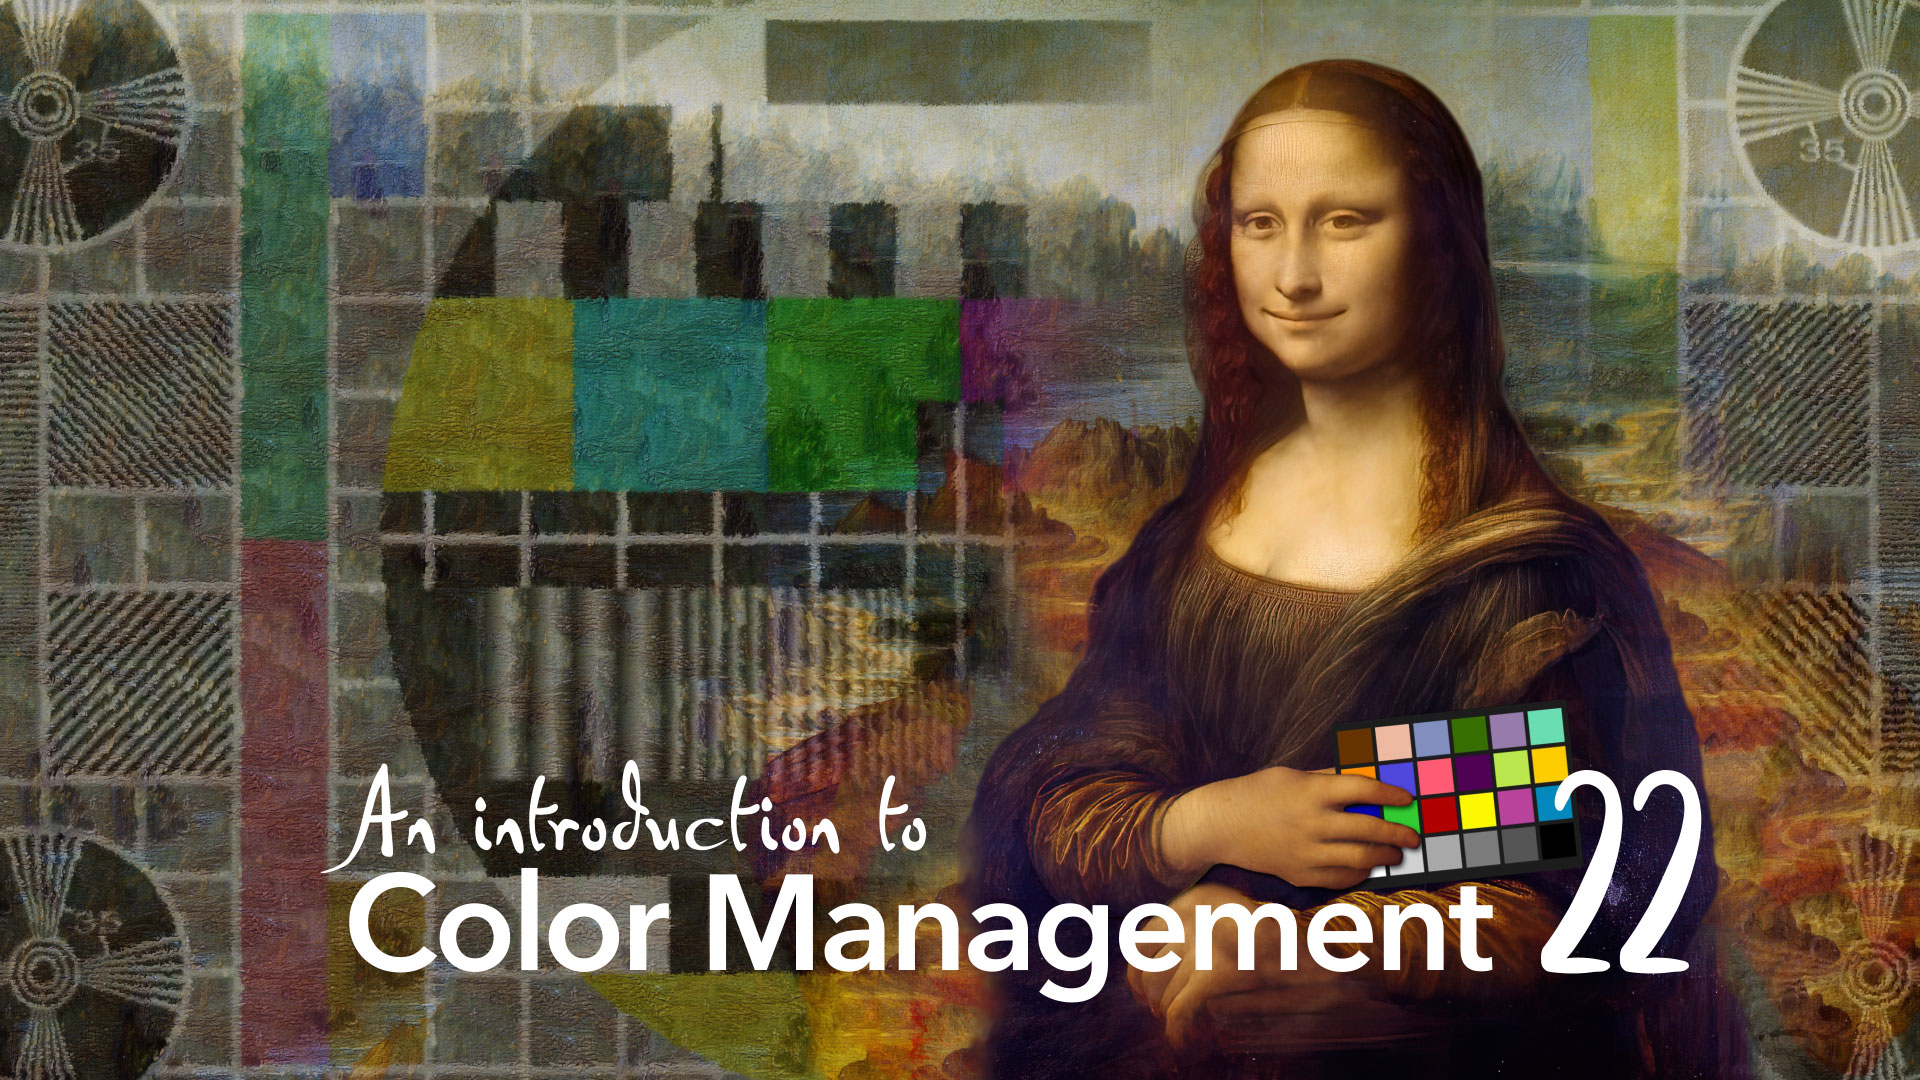 Color Management Part 22: Introducing Tone Mapping 12